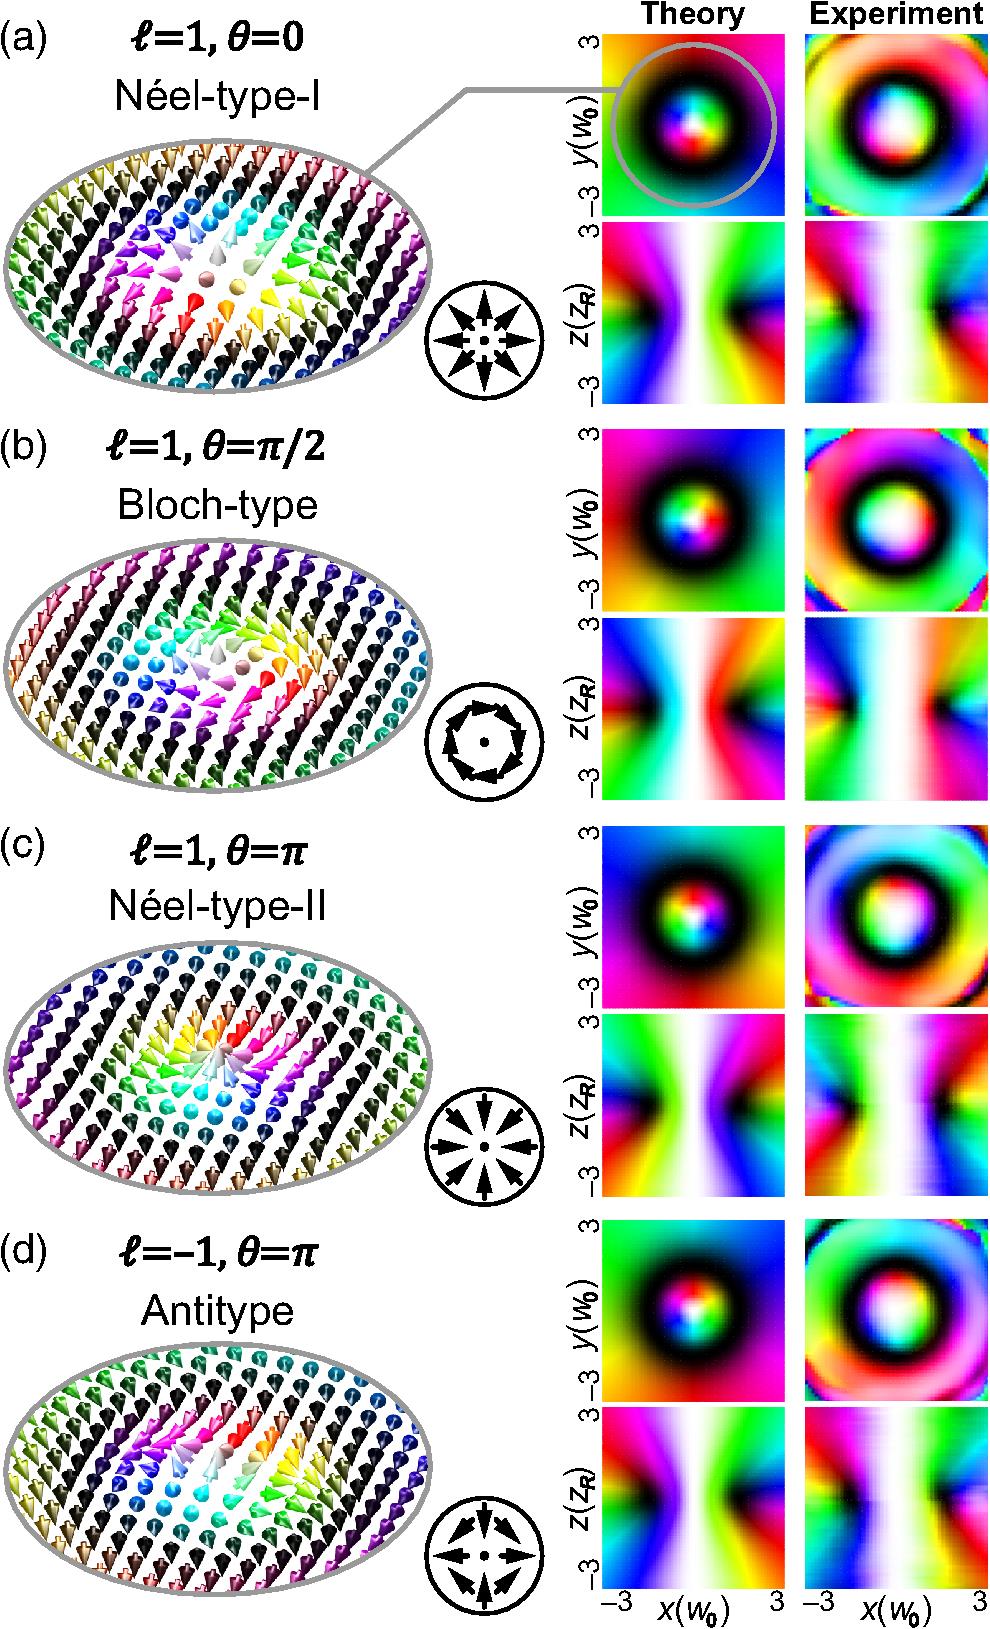 Left, simulated Stokes vector distributions in the skyrmionium textures in the x–y (z=0) plane of the photonic hopfions of (a) Néel Type-I (QP=1,QV=1,θ=0), (b) Bloch type (QP=1,QV=1,θ=π/2), (c) Néel Type-II (QP=1,QV=1,θ=π), and (d) antitype (QP=1,QV=−1,θ=π). The insets in black circles highlight the corresponding texture of the x–y components. Right, theoretical and experimental polarization distributions represented by Poincaré parameters (orientation and ellipticity of the polarization ellipse) in the x–y and y–z planes for the topological hopfions in panels (a)–(d). The x and y scales are normalized to the fundamental mode waist radius w0, and the z-scale is normalized to the Rayleigh range zR. The color scale is as shown in Fig. 1.